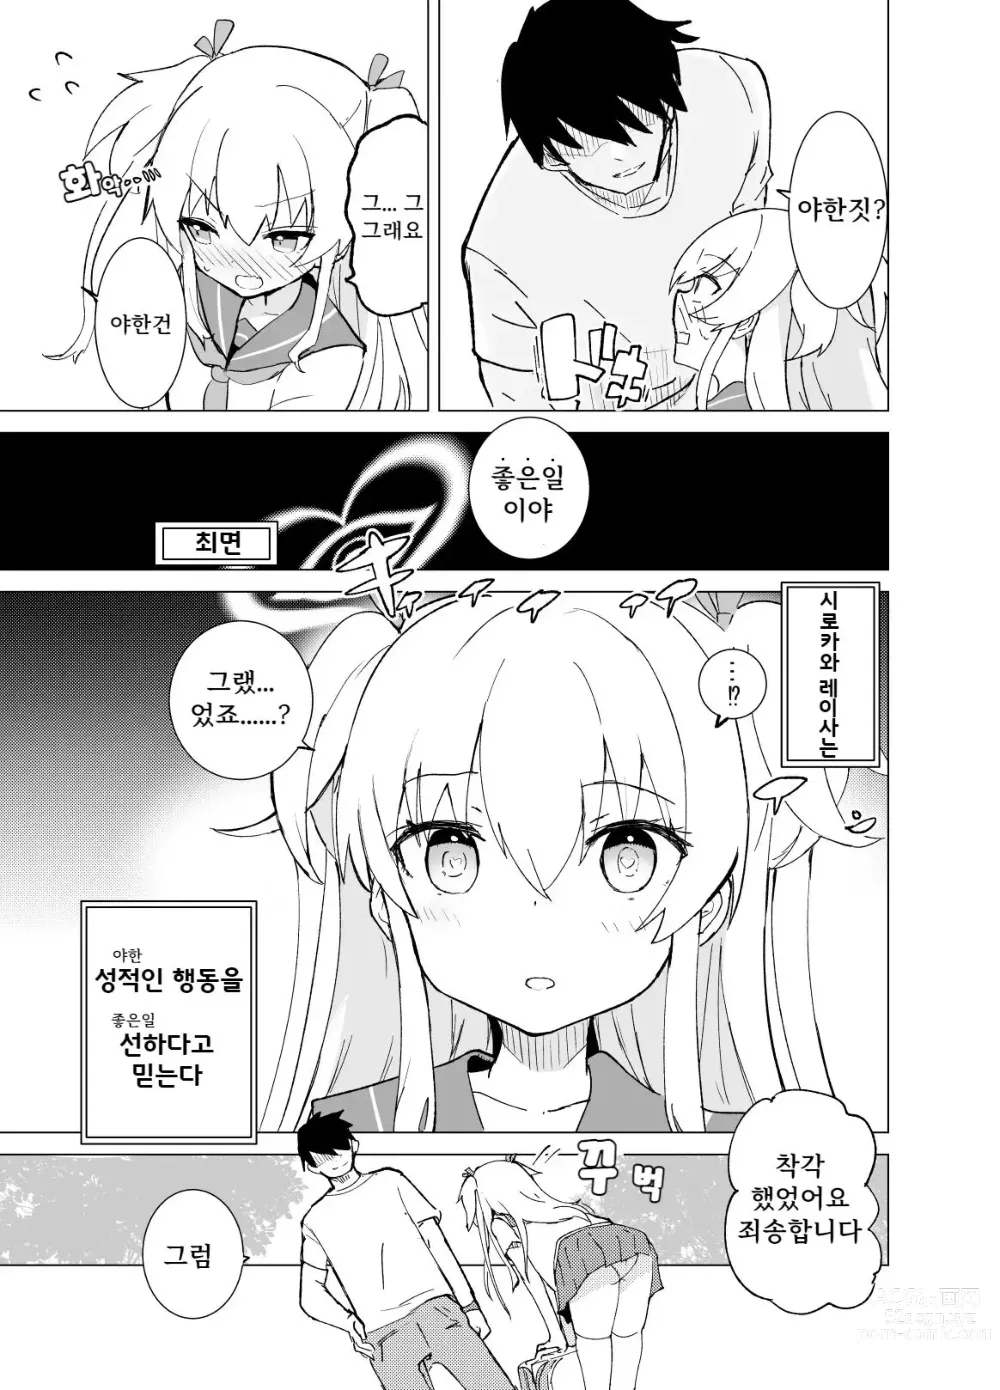 Page 14 of doujinshi S.S.S.Di part 1